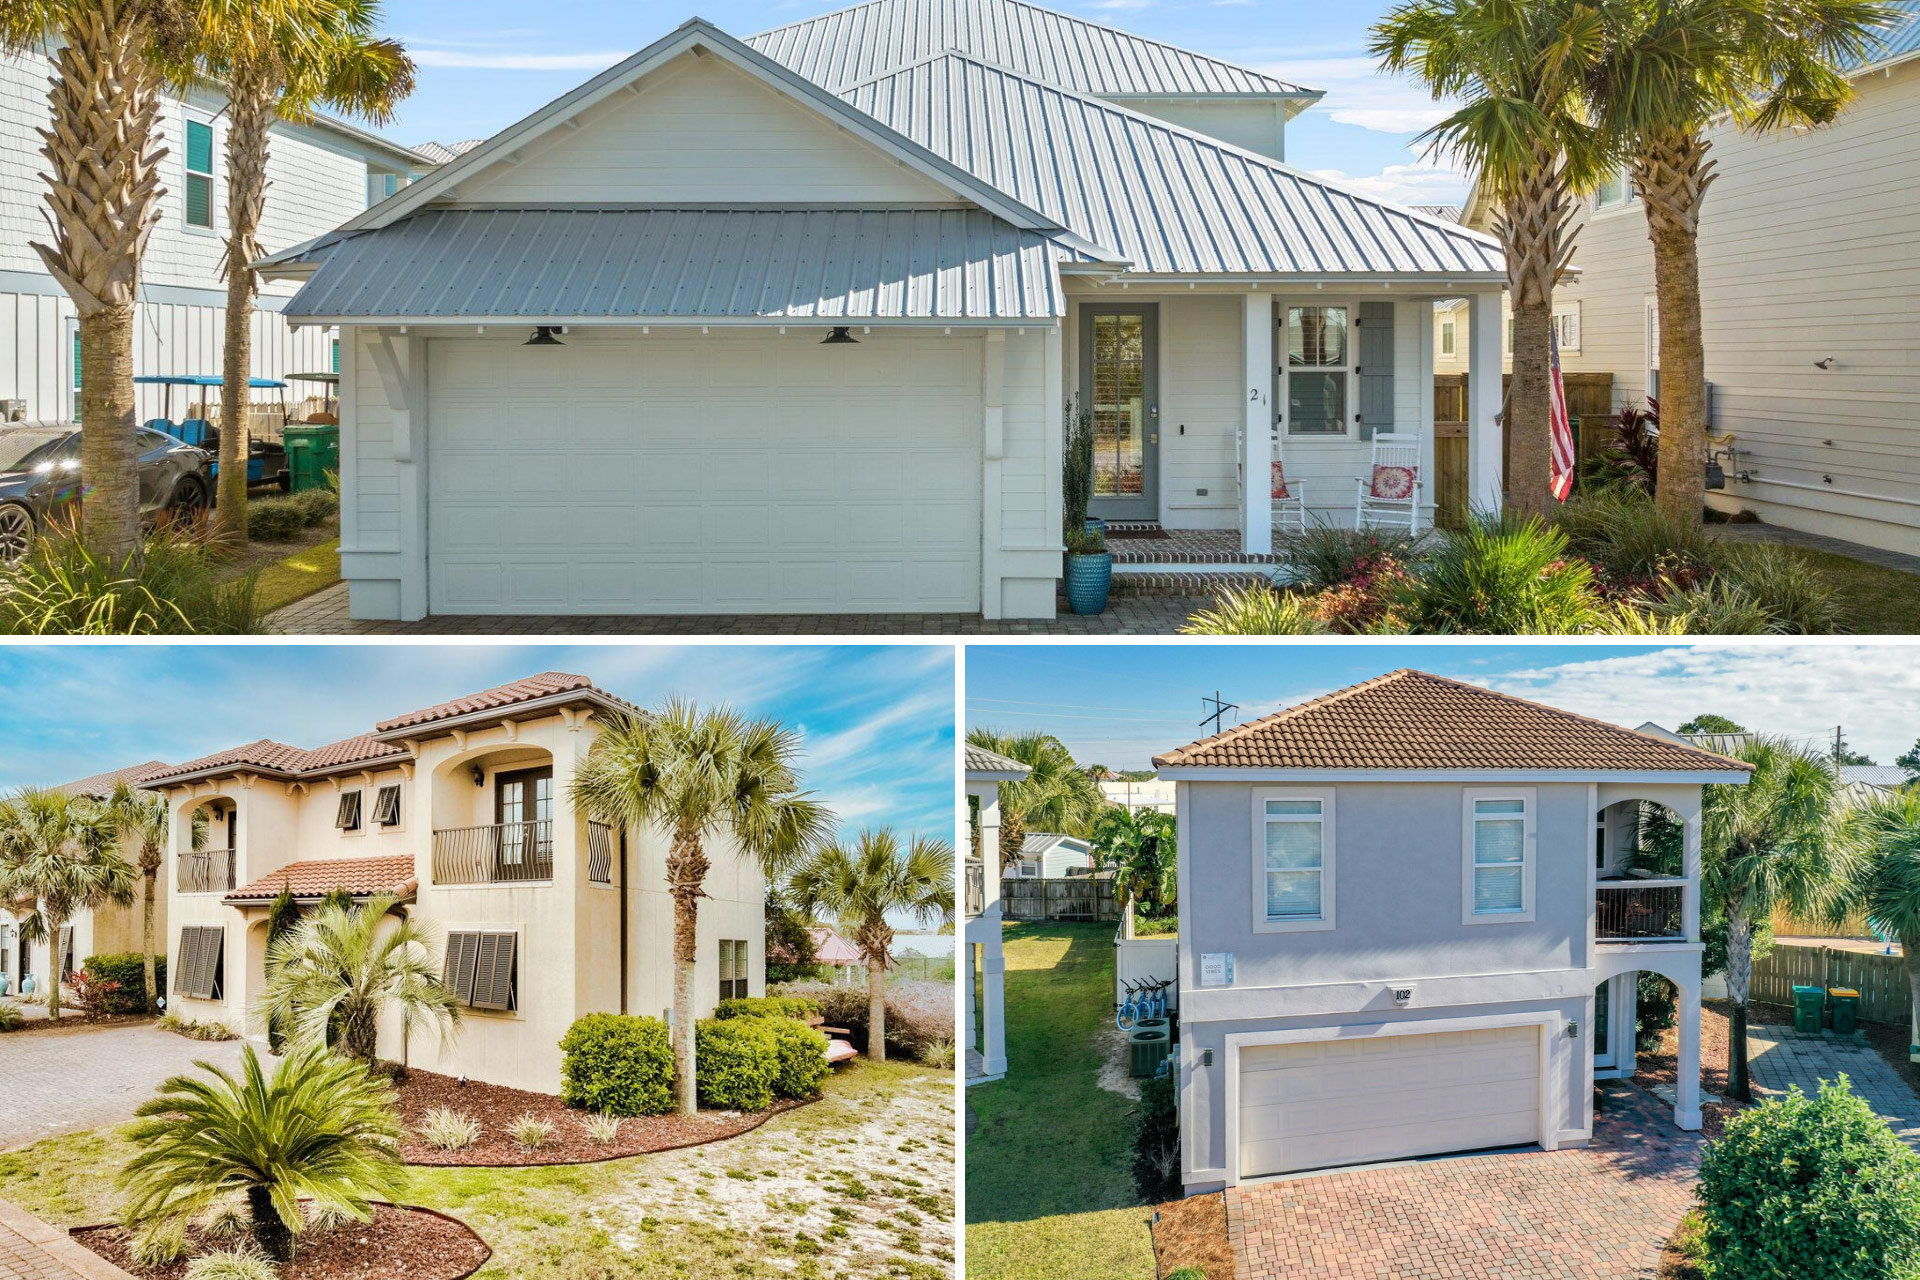 3 Destin Vacation Homes For Sale Under $1.5M